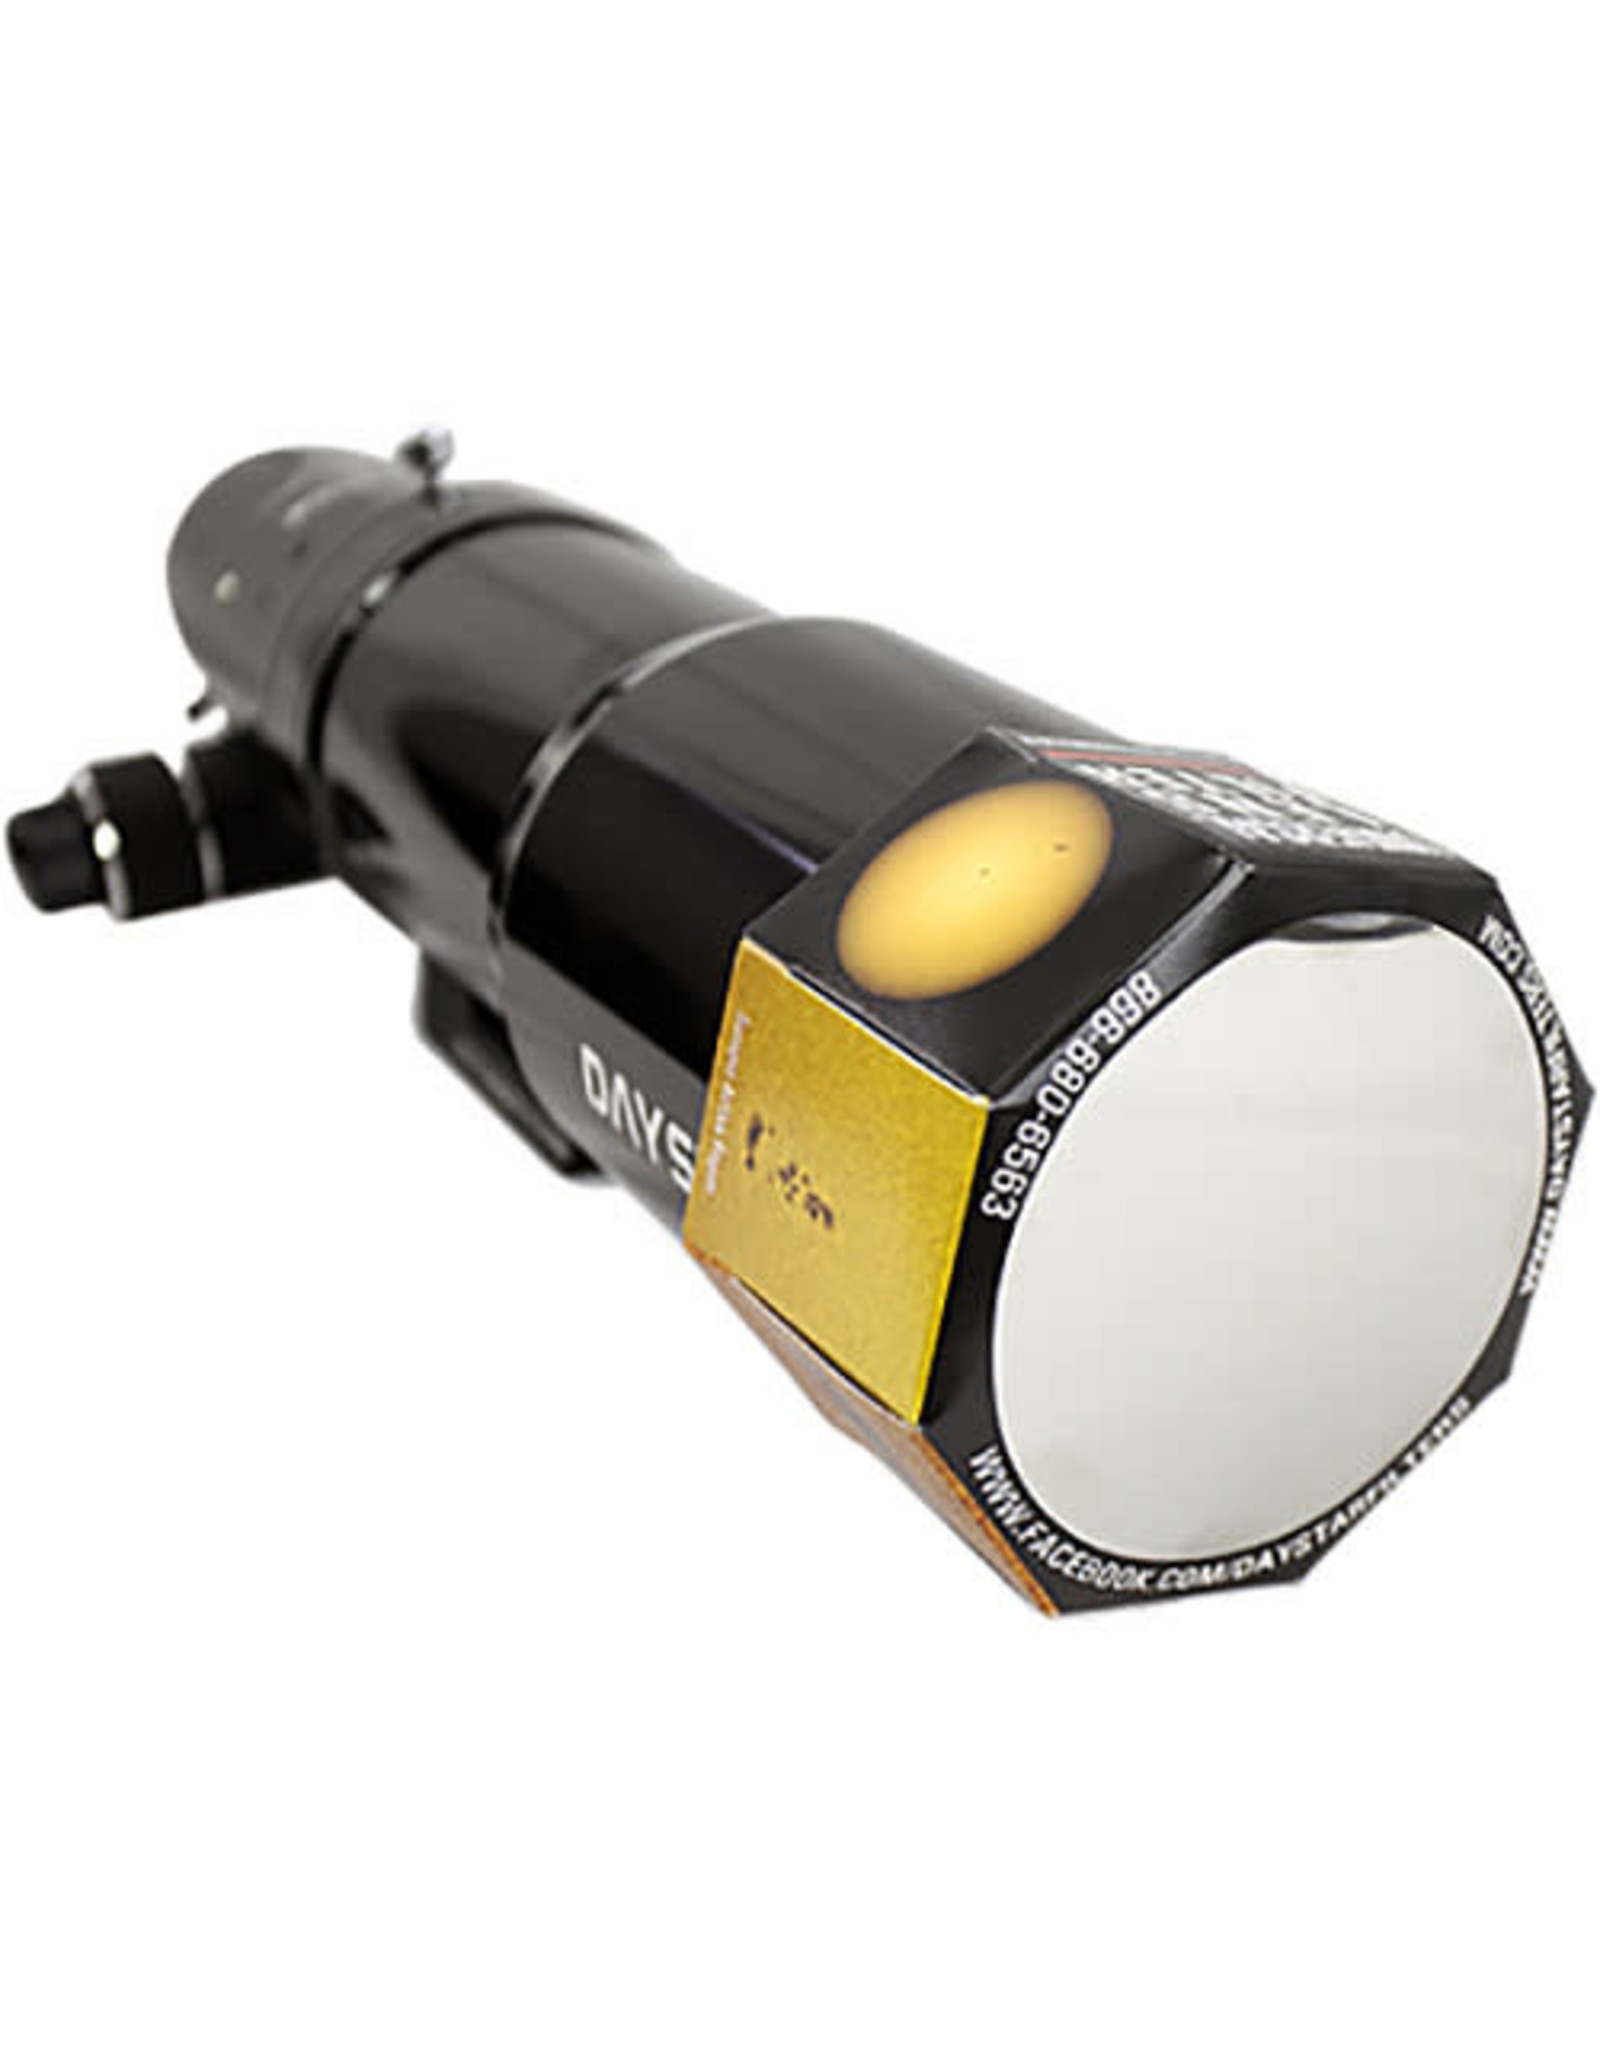 DayStar DayStar Filters White-Light ULF Solar Combo Pack for Binoculars/Camera (Two 50mm, One 70mm)